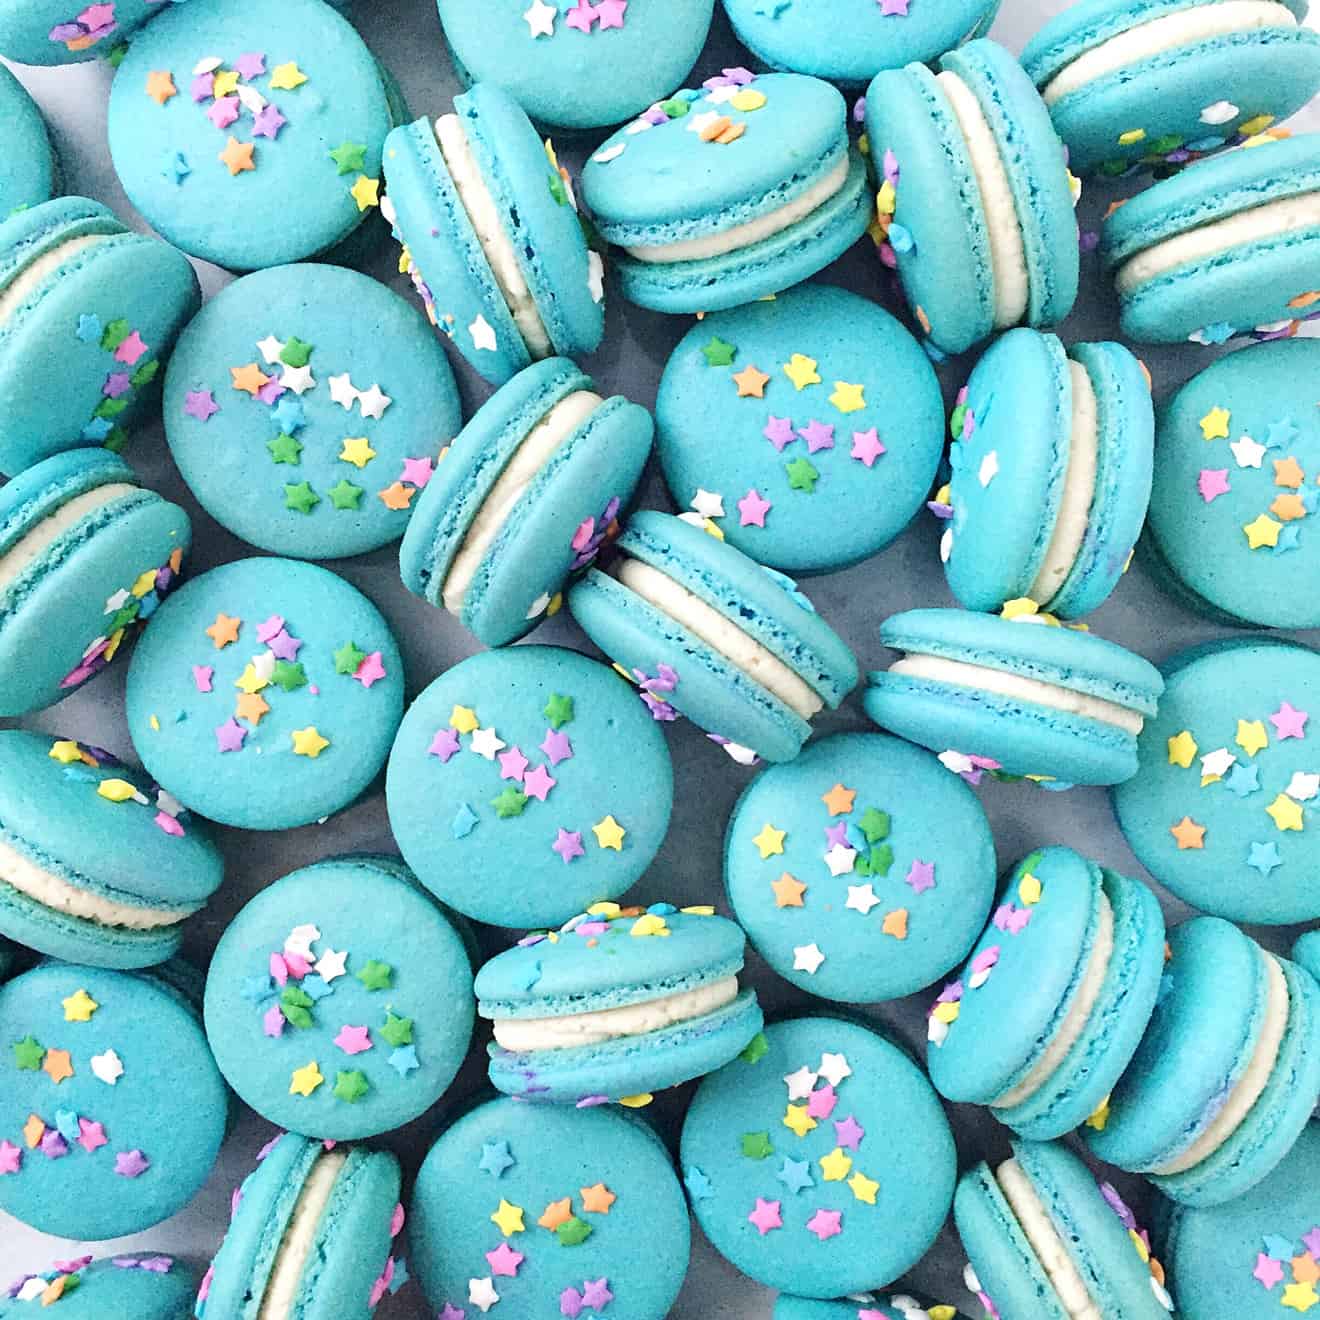 blue french macarons with star sprinkles and vanilla icing filling